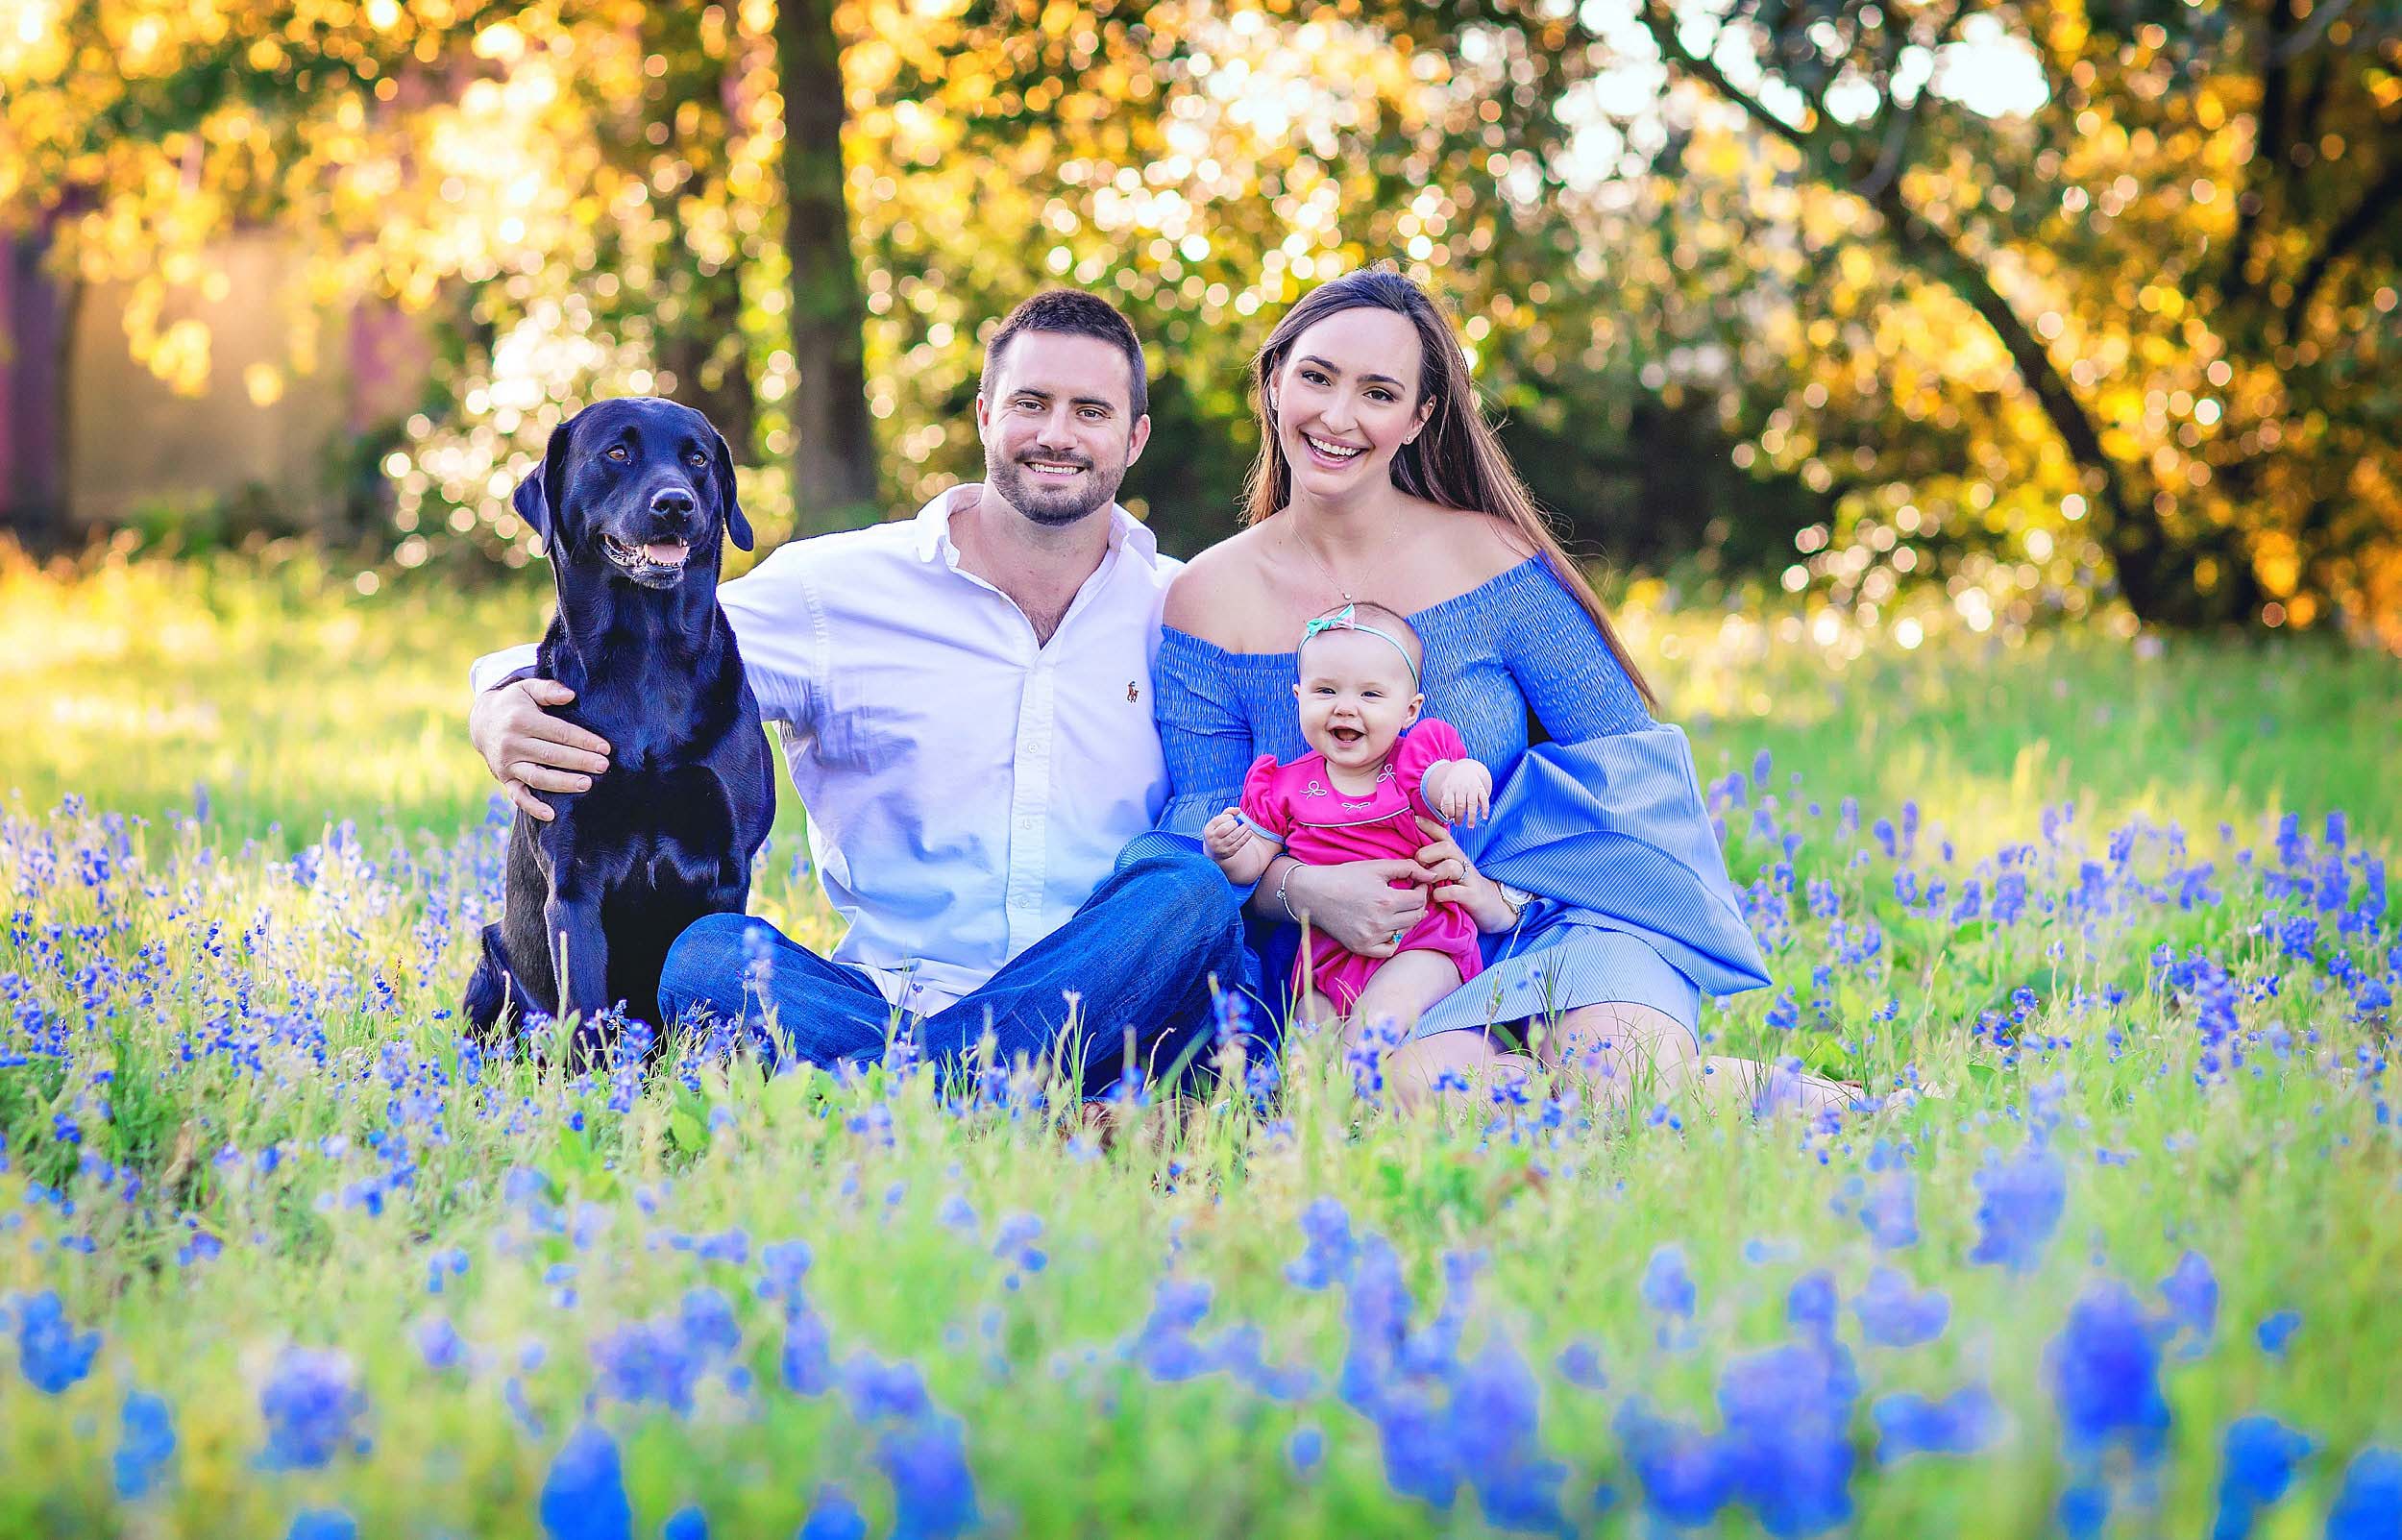  Vibrant and colorful family portrait in the bluebonnets in The Woodlands, Texas by spryART photography. 